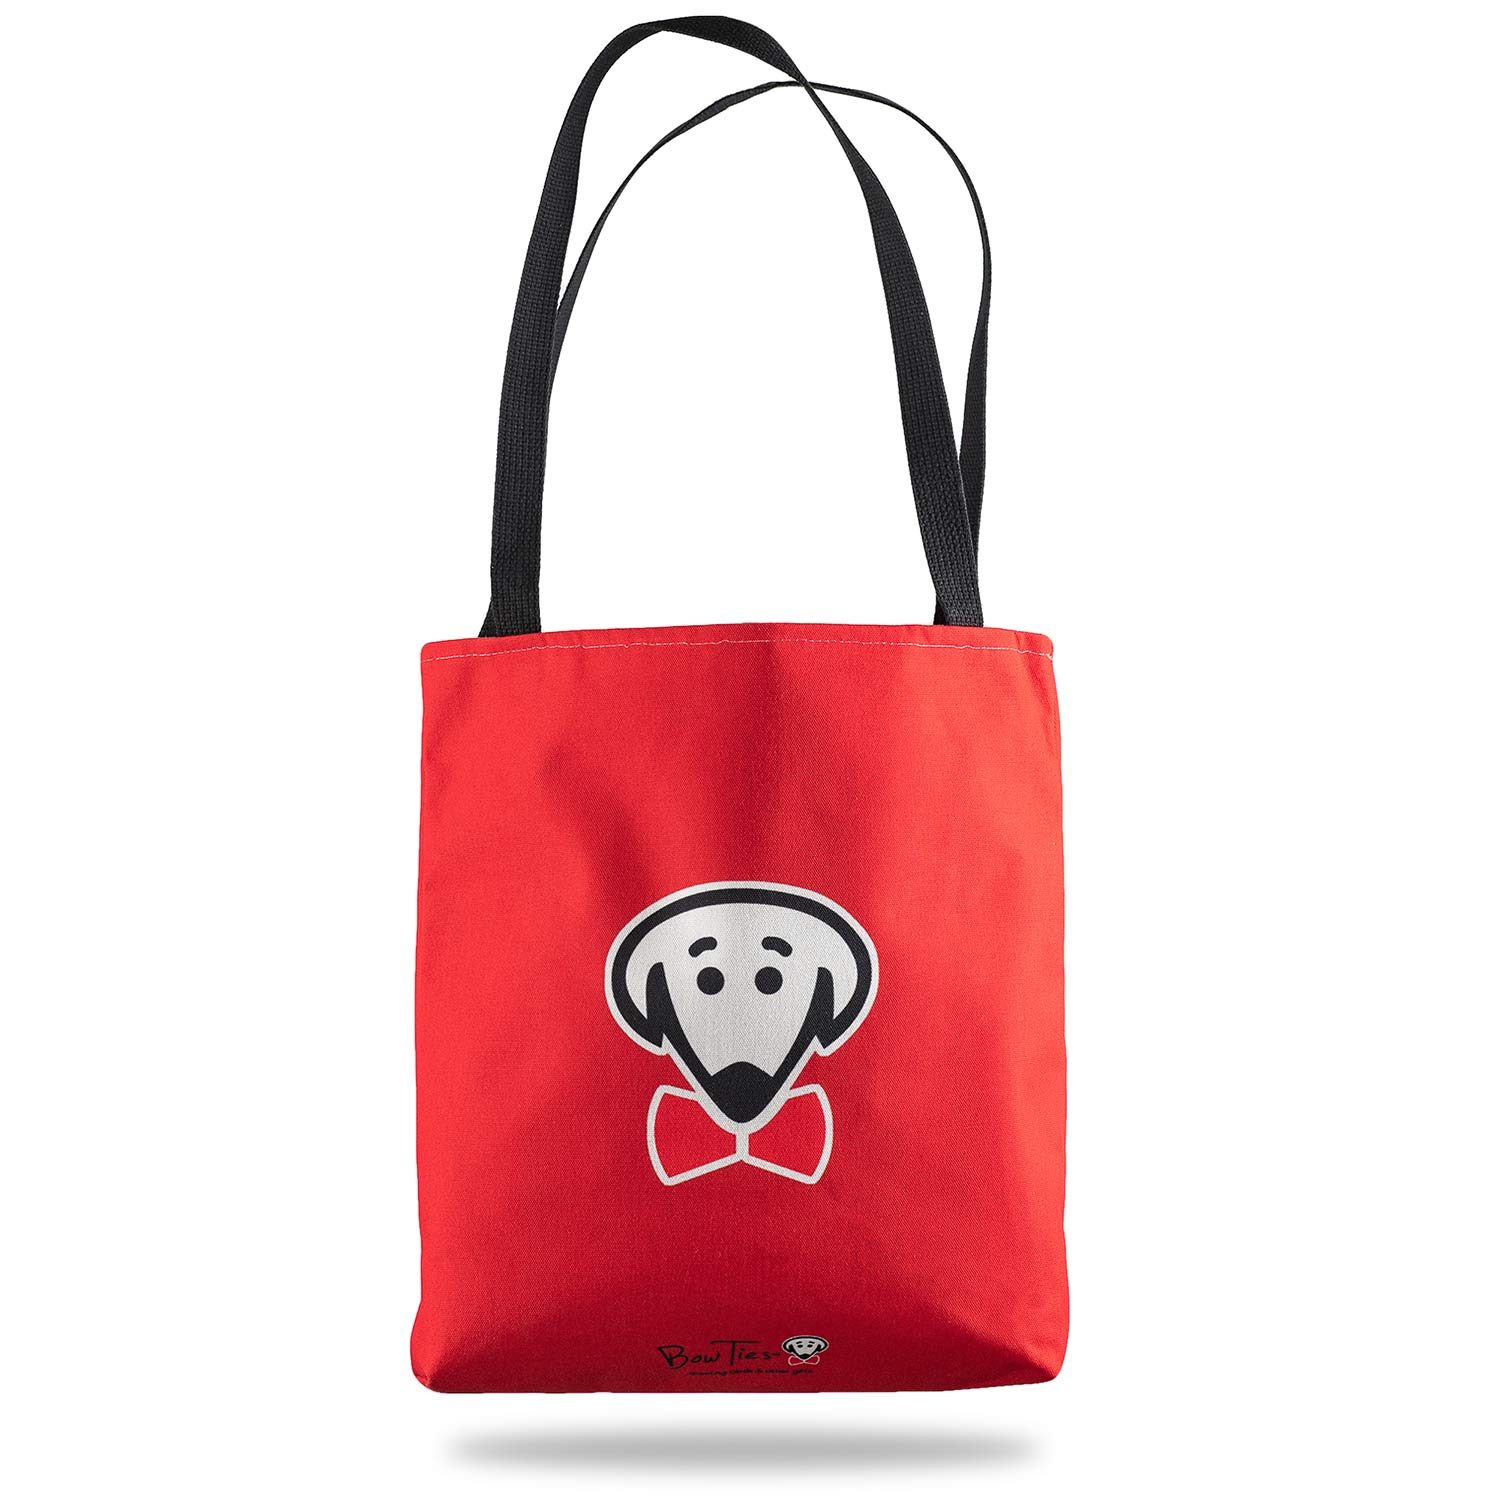 On the Run tote in red by Beau Tyler